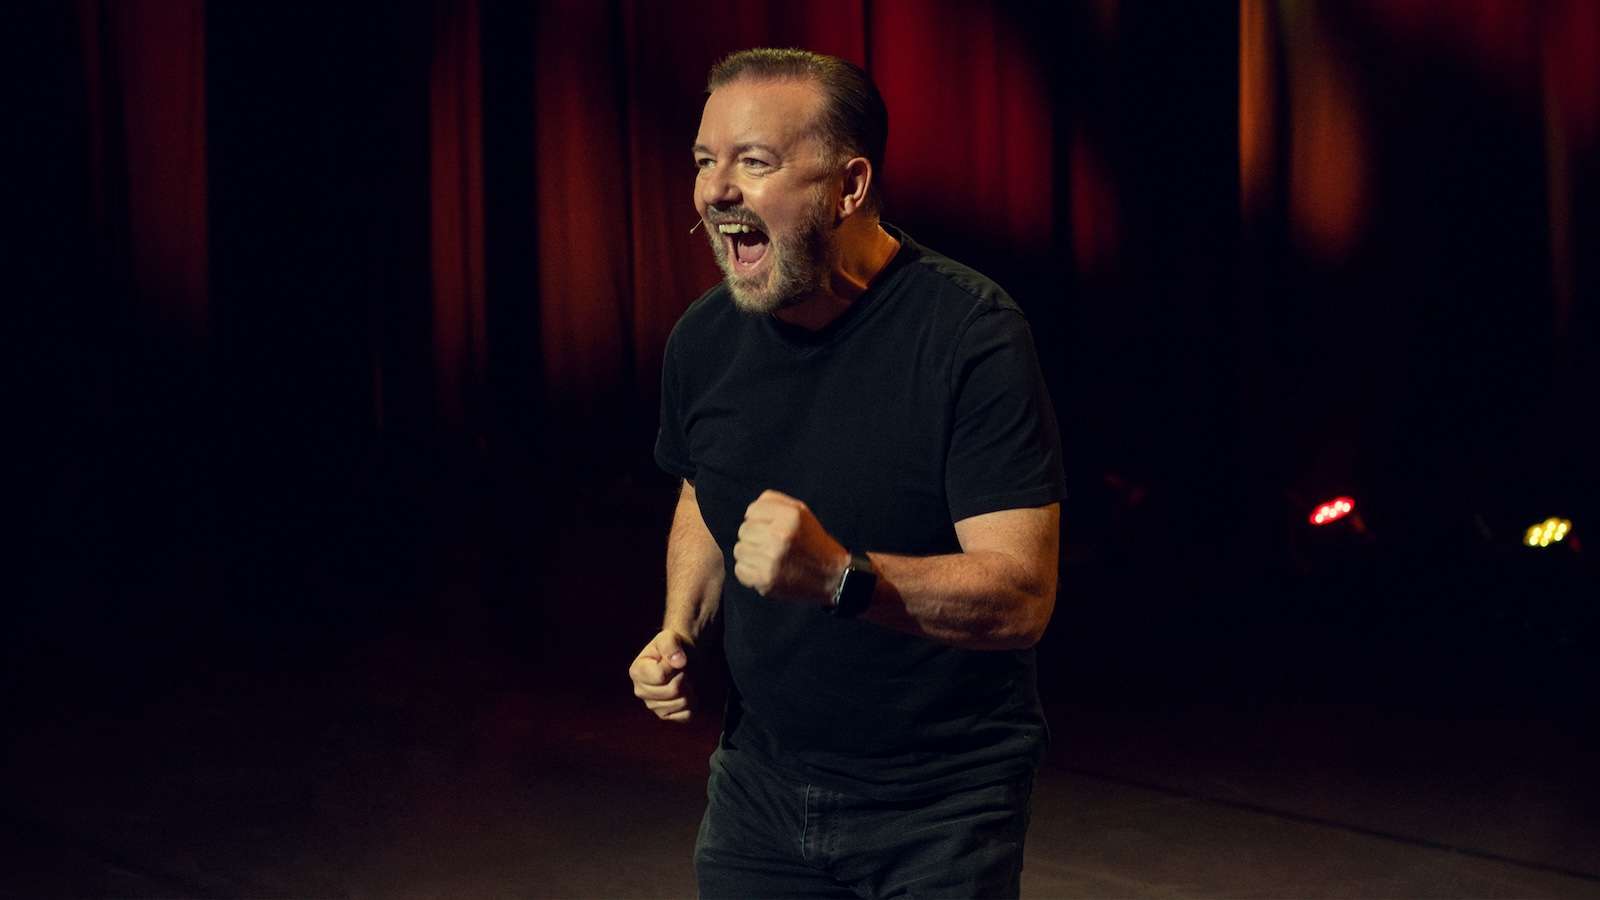 Ricky Gervais in his Netflix stand-up special Armageddon